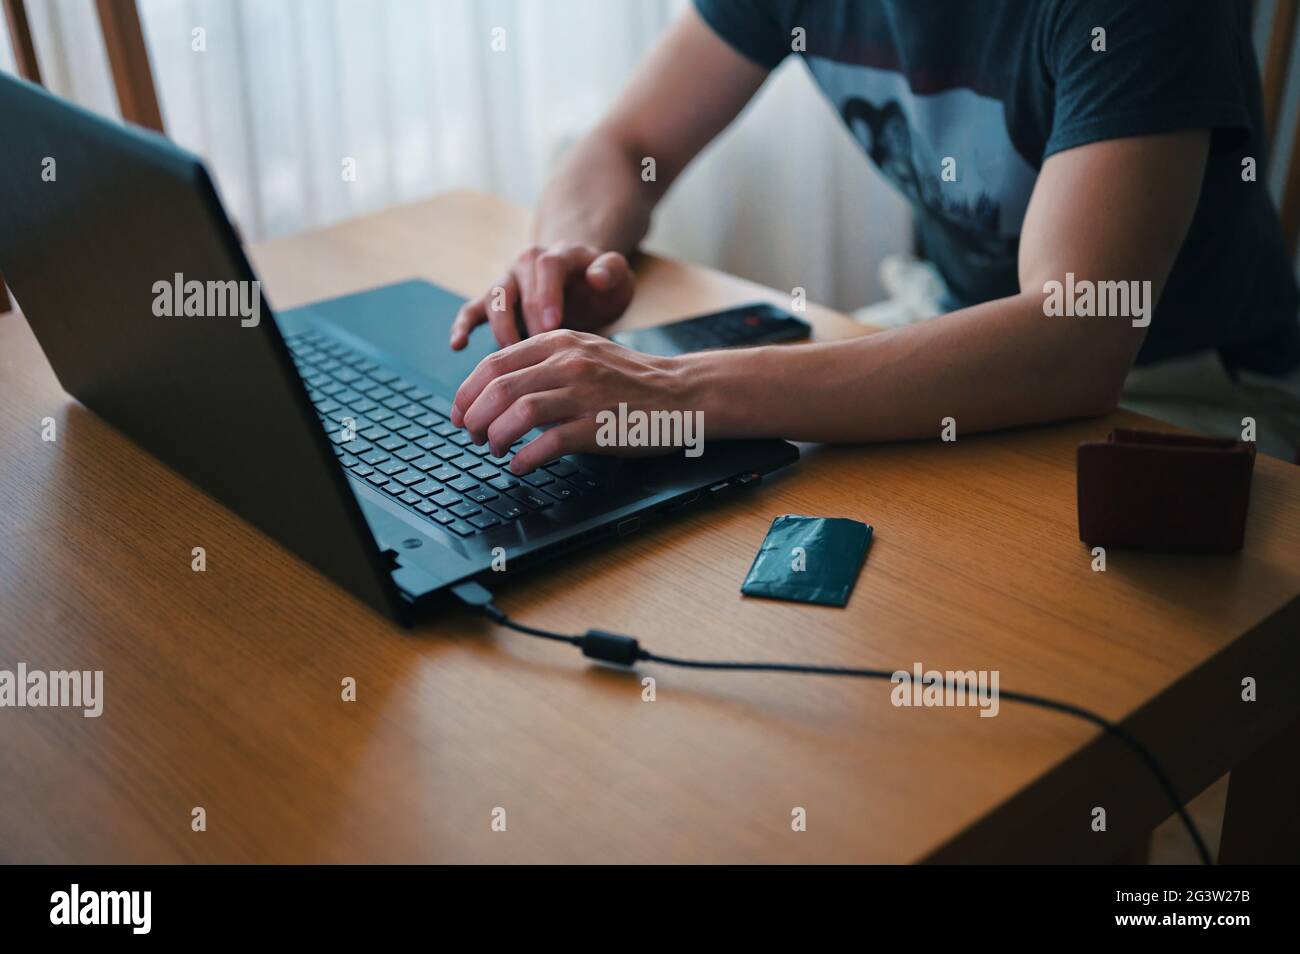 Midsection of man using laptop Stock Photo